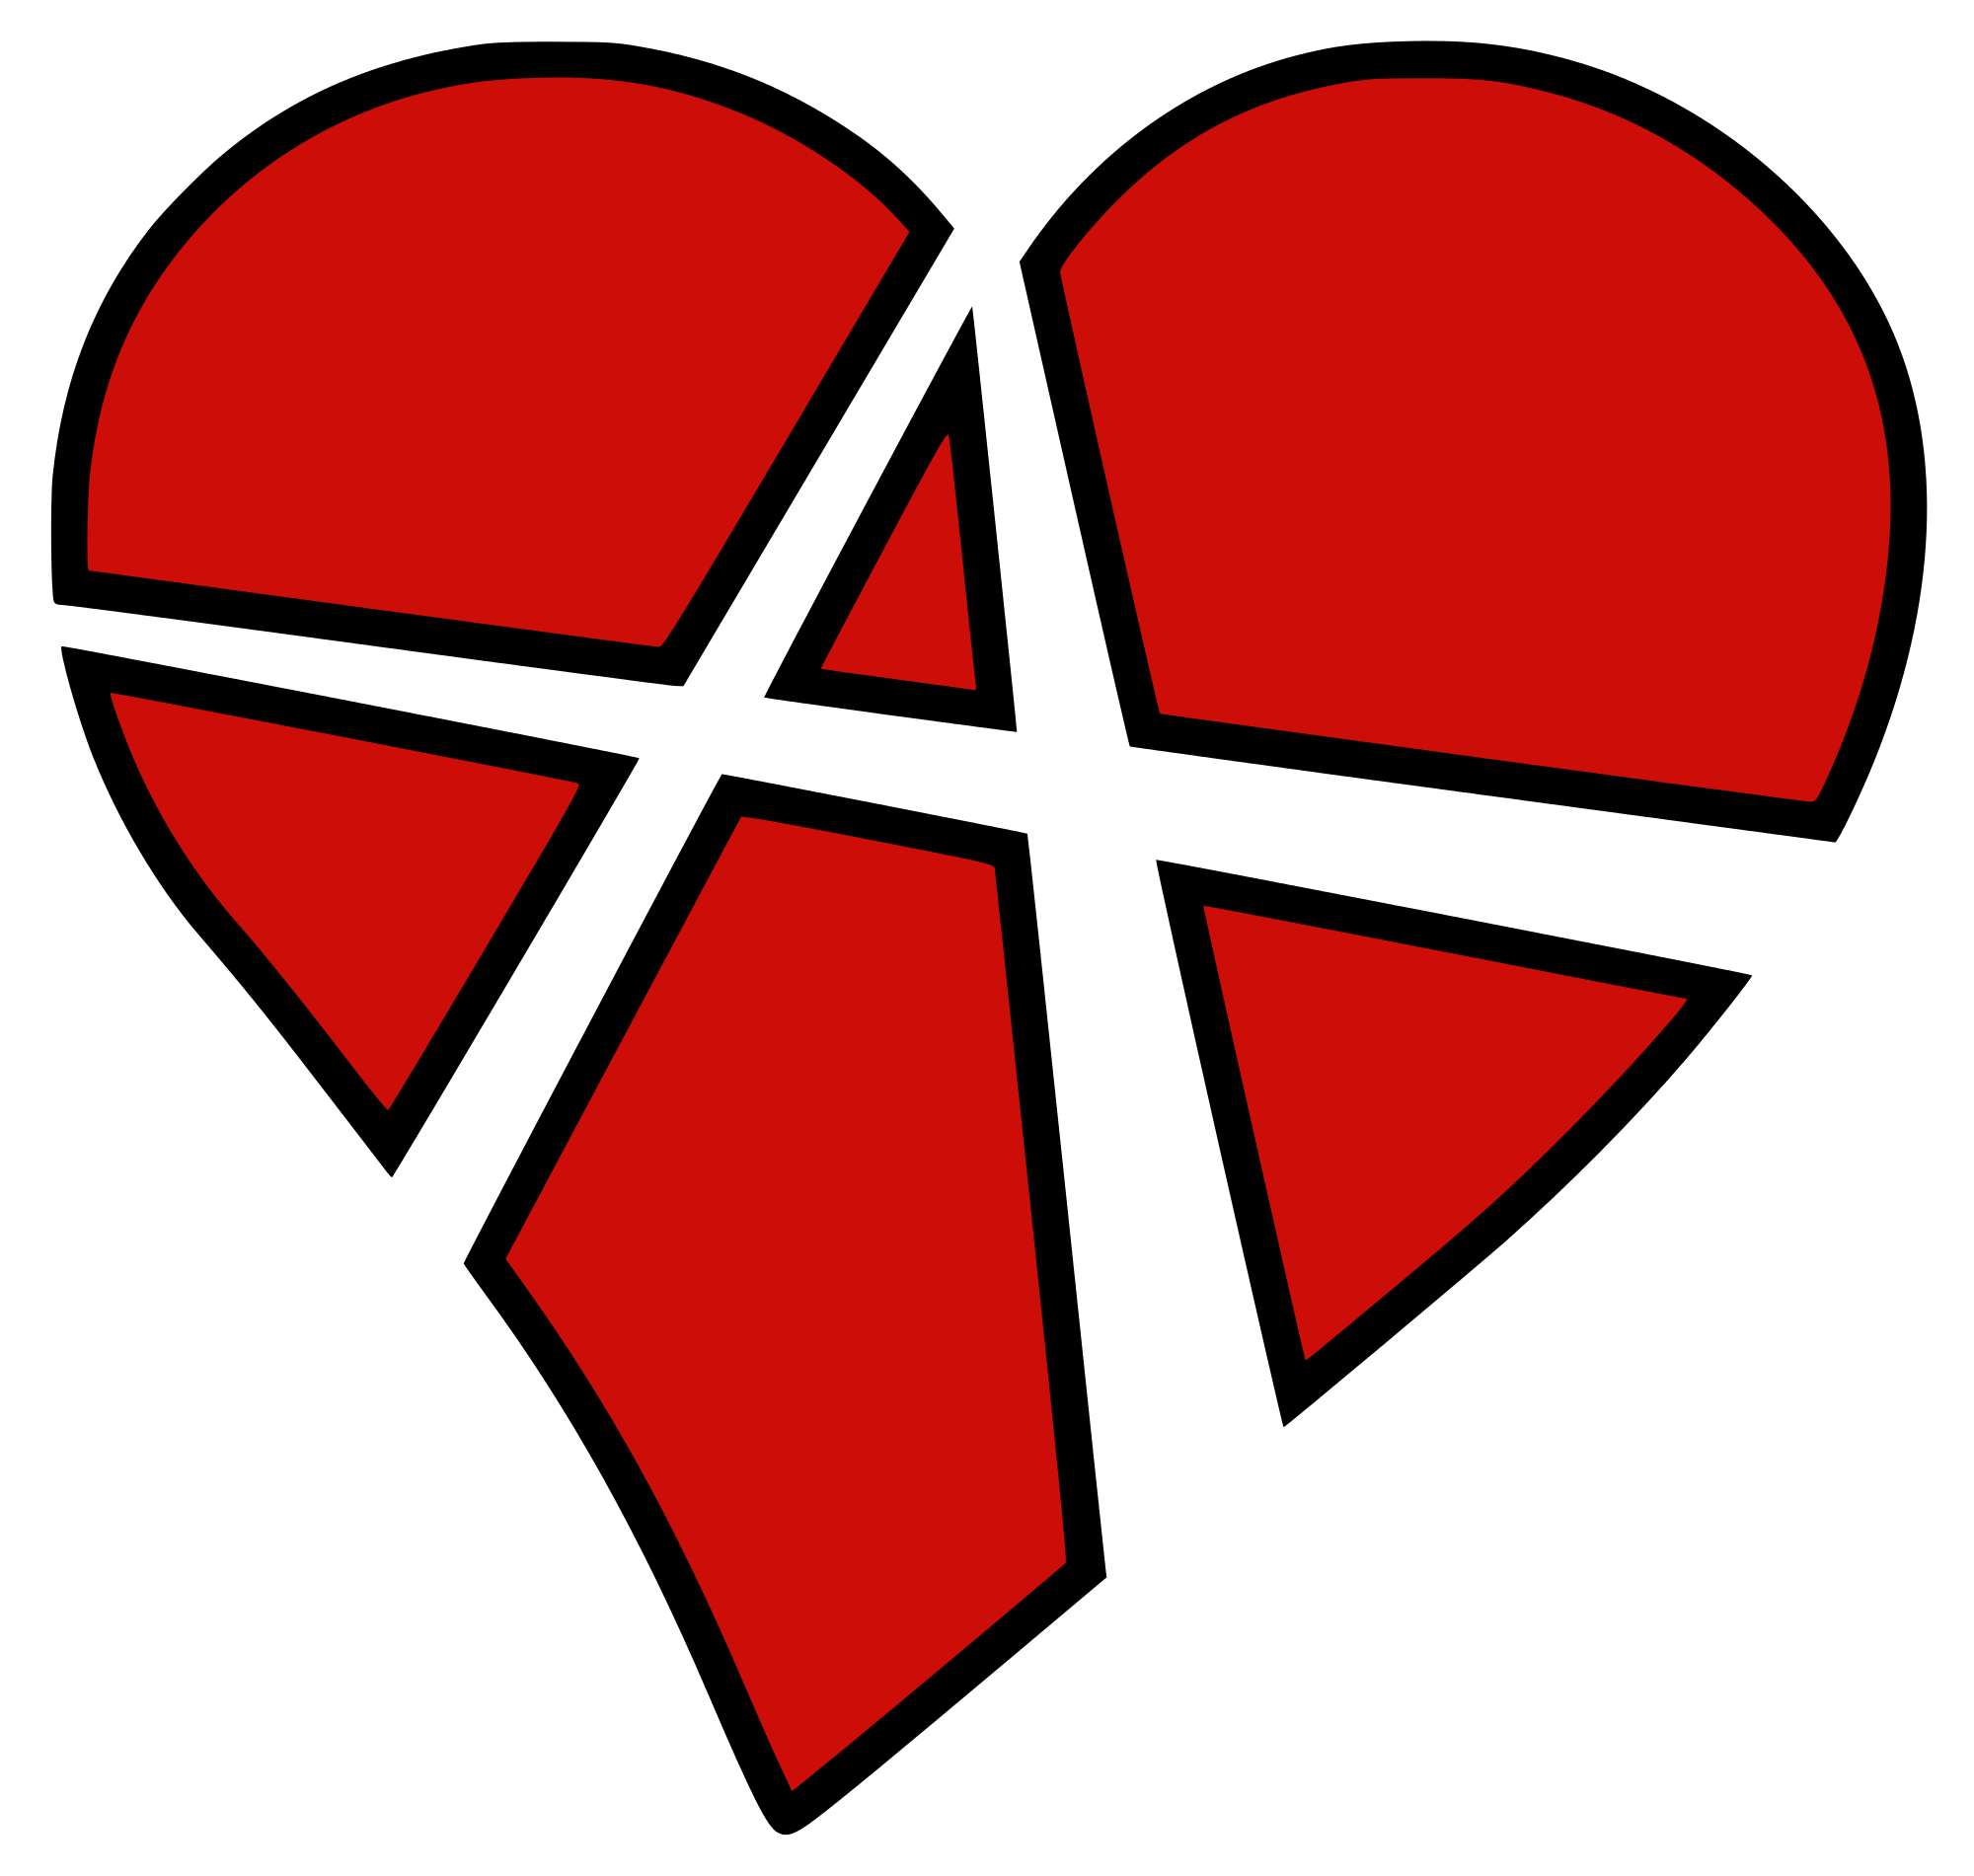 Relationship anarchy - Wikipedia, the free encyclopedia